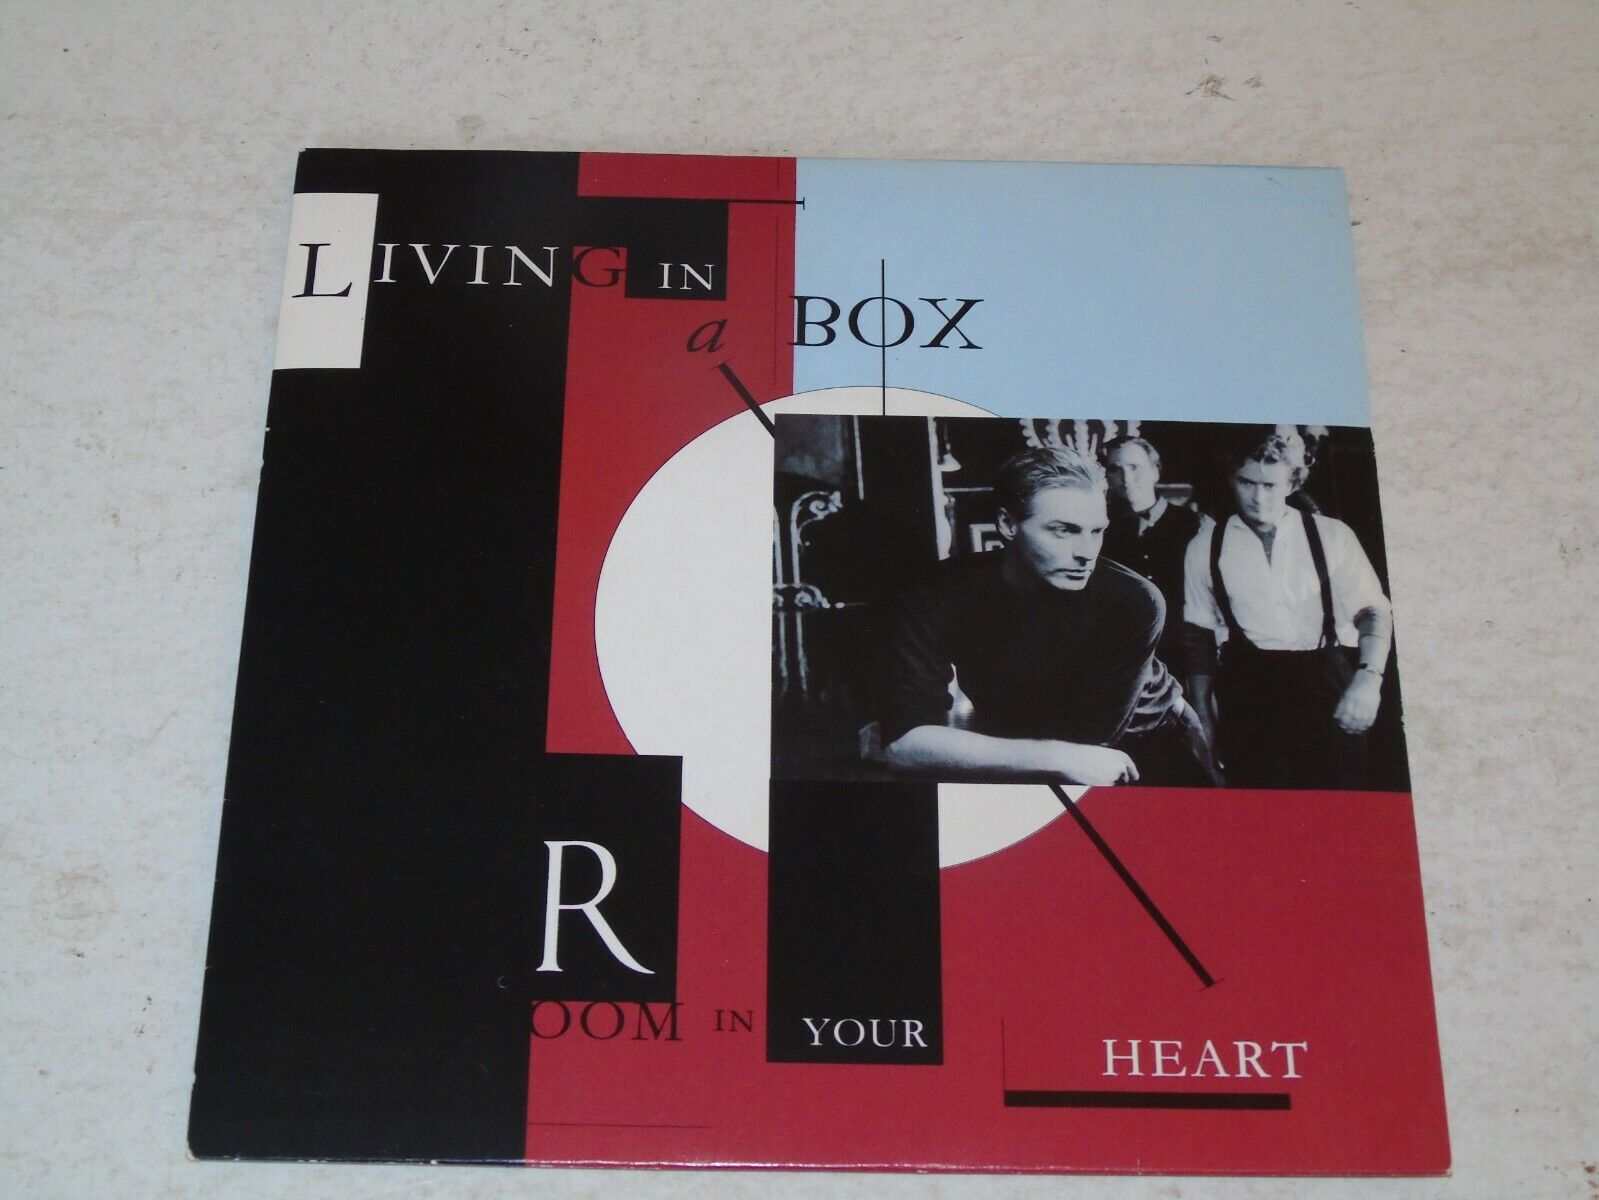 LIVING IN A BOX - Room In Your Heart - 1989 UK 2-Track 7" Vinyl Single